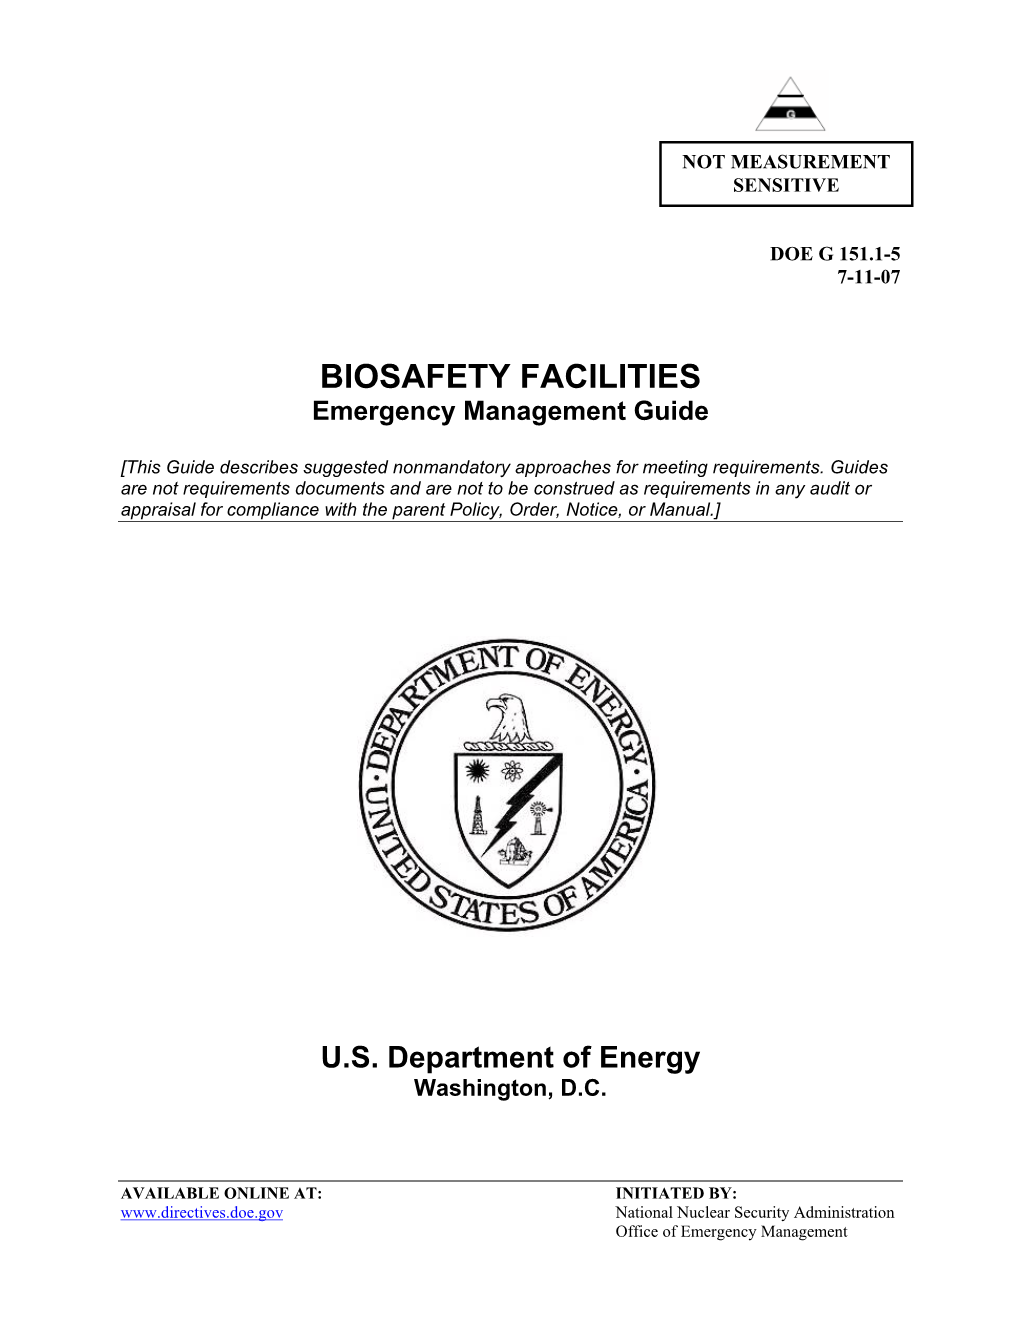 BIOSAFETY FACILITIES Emergency Management Guide